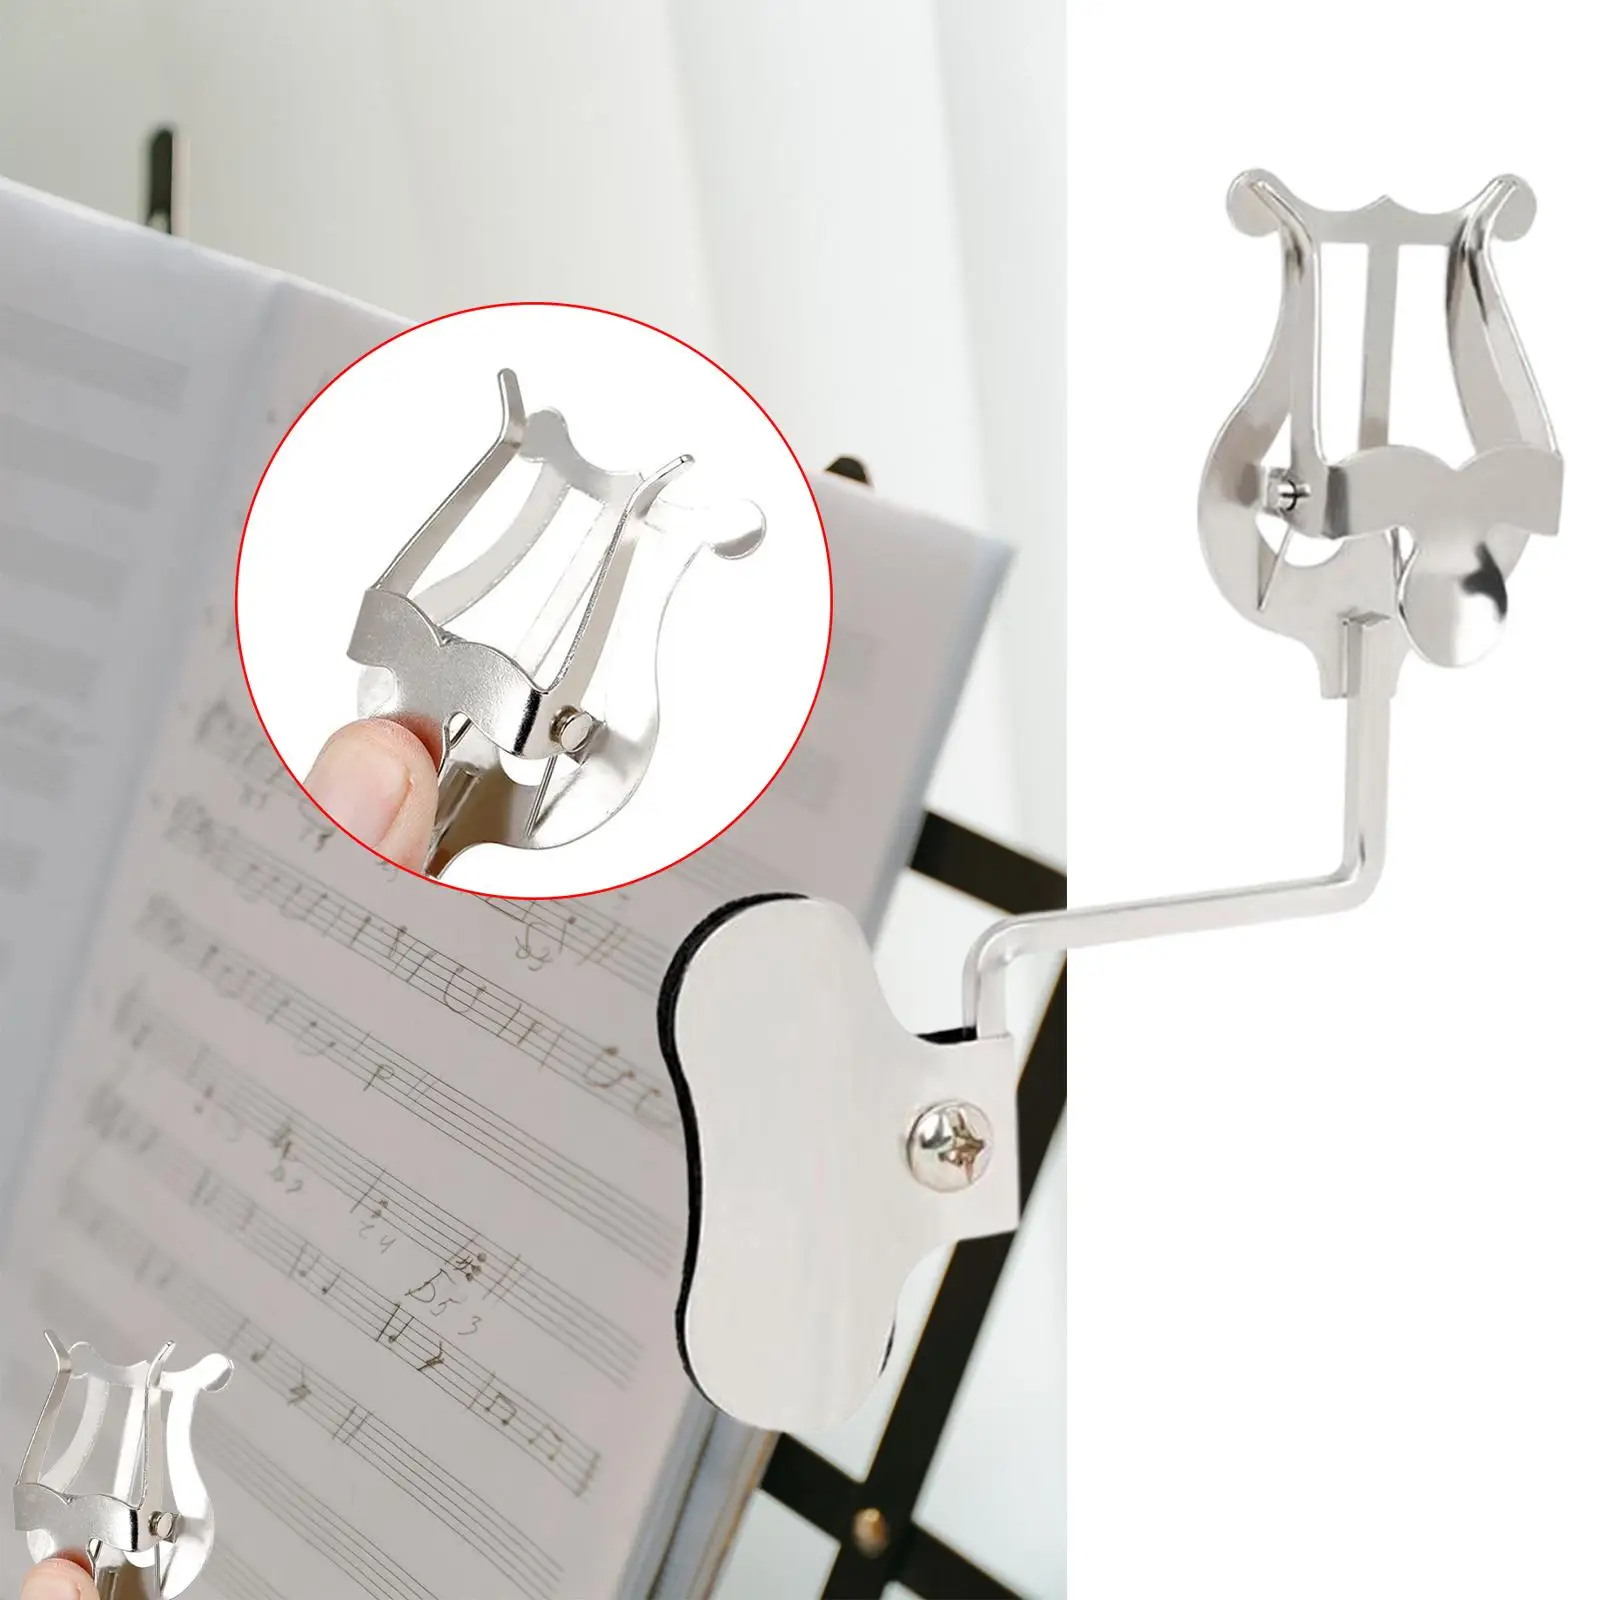 Trumpet Marching Clamp Music Sheet Clip Universal Durable for Clarinet Trumpet